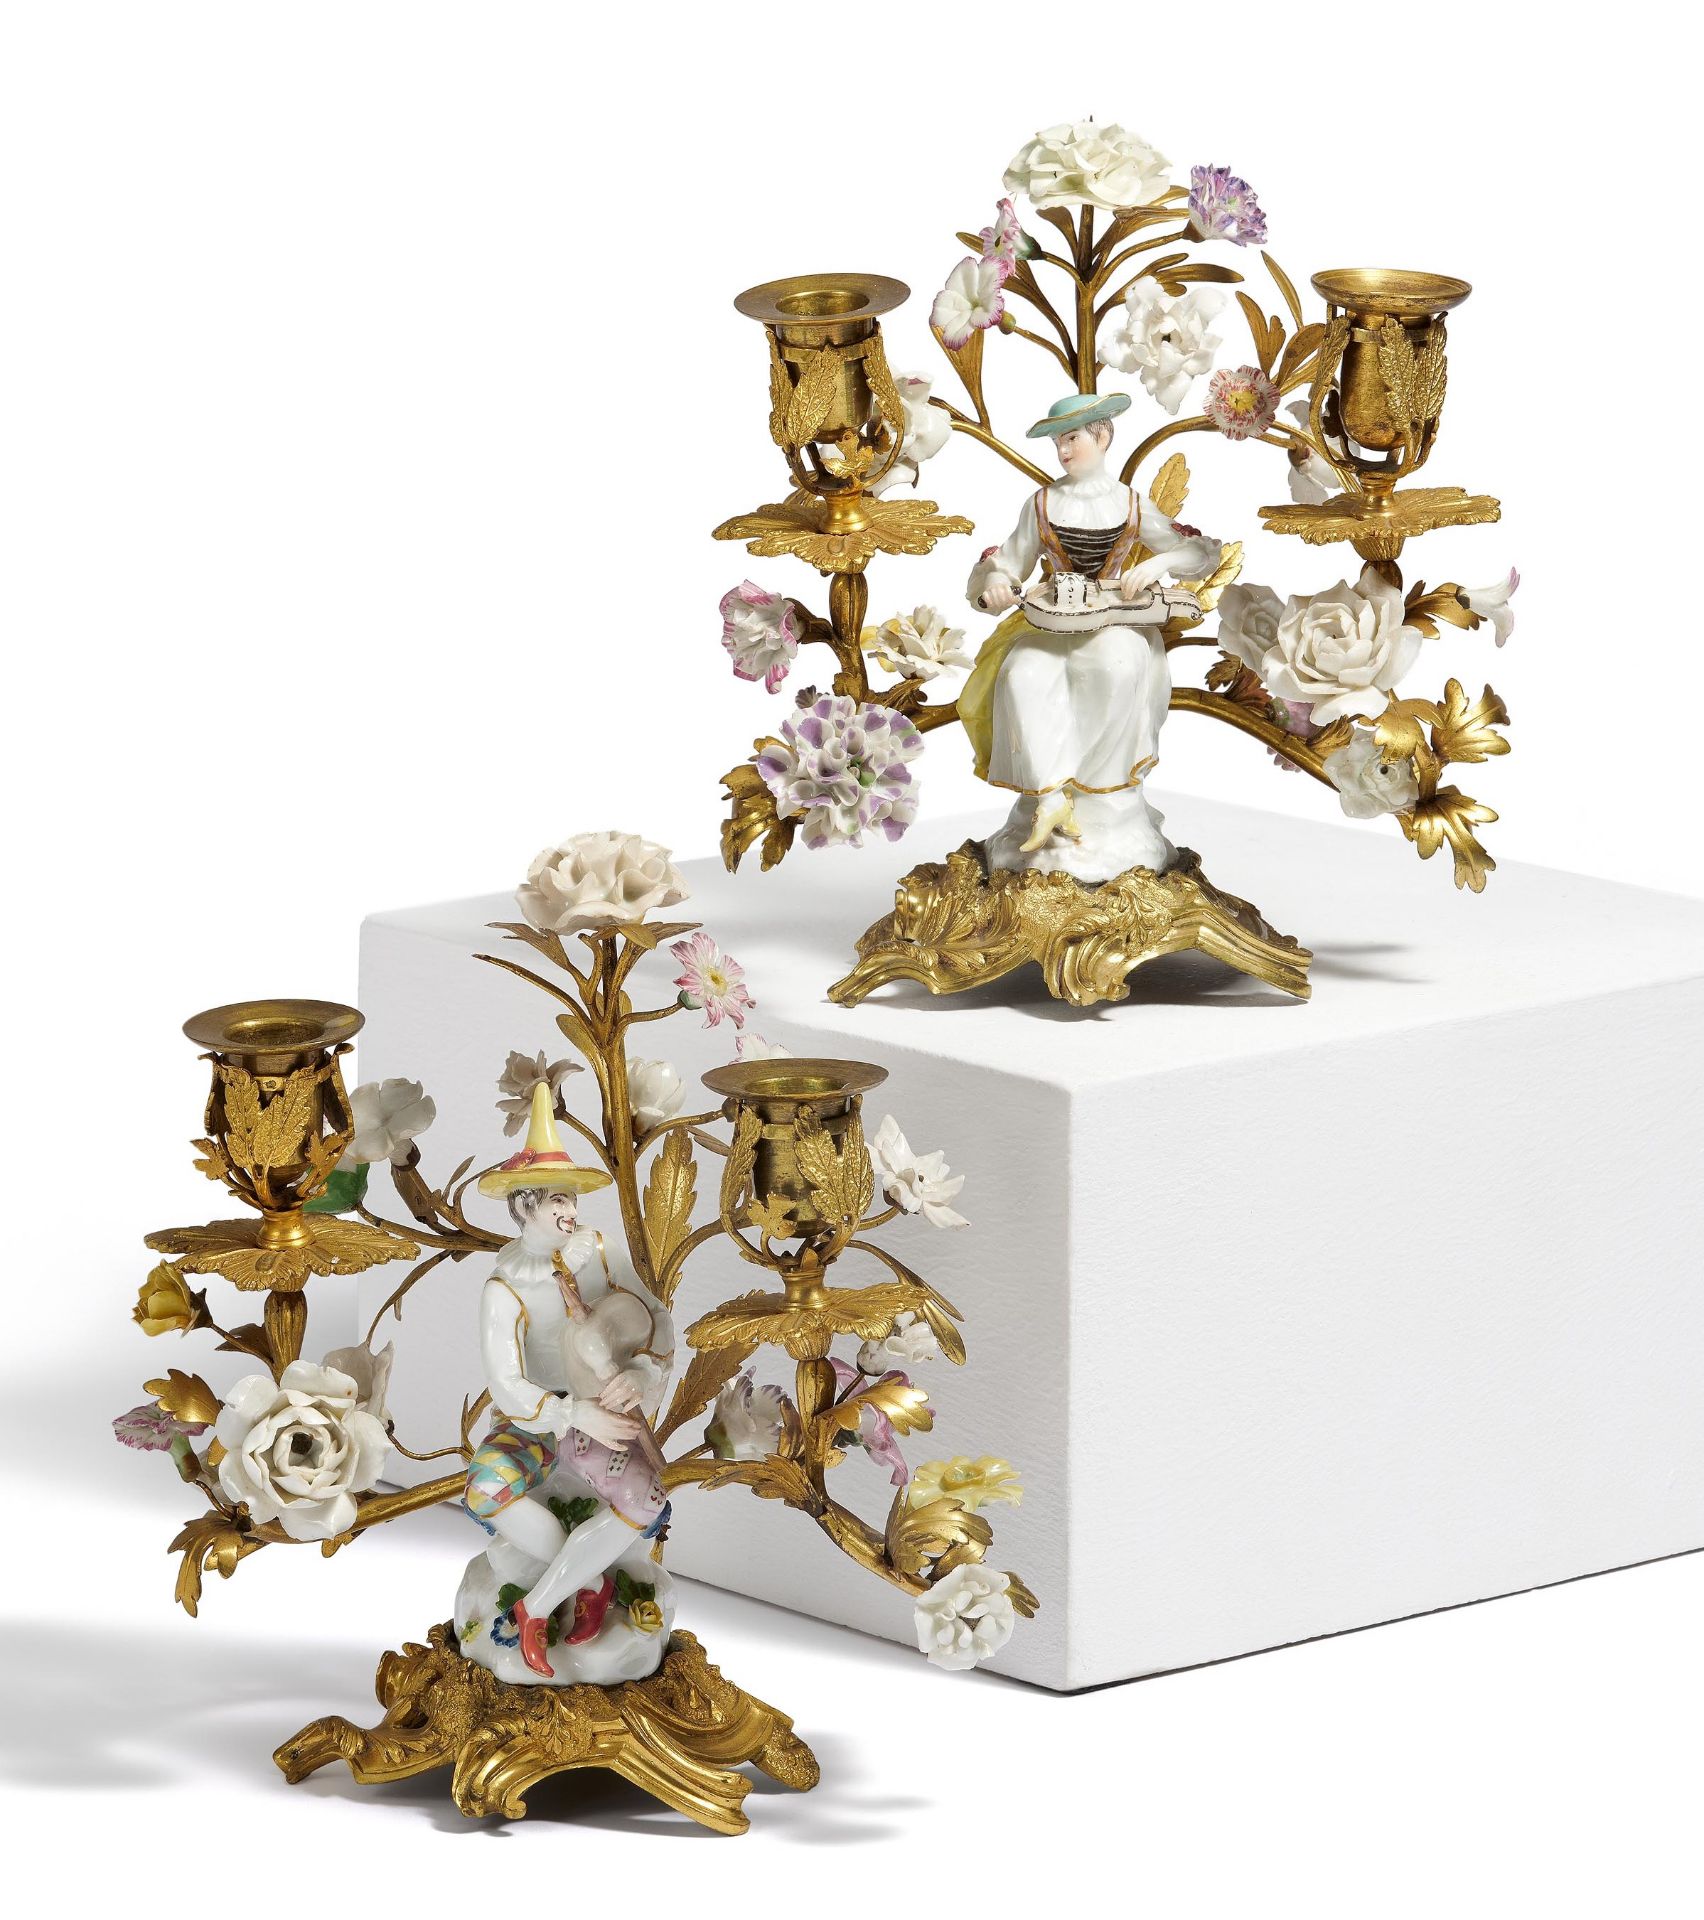 France: PAIR OF GILT BRONZE CANDELABRAS WITH TENDRIL BRANCHES AND PORCELAIN MUSICIANS